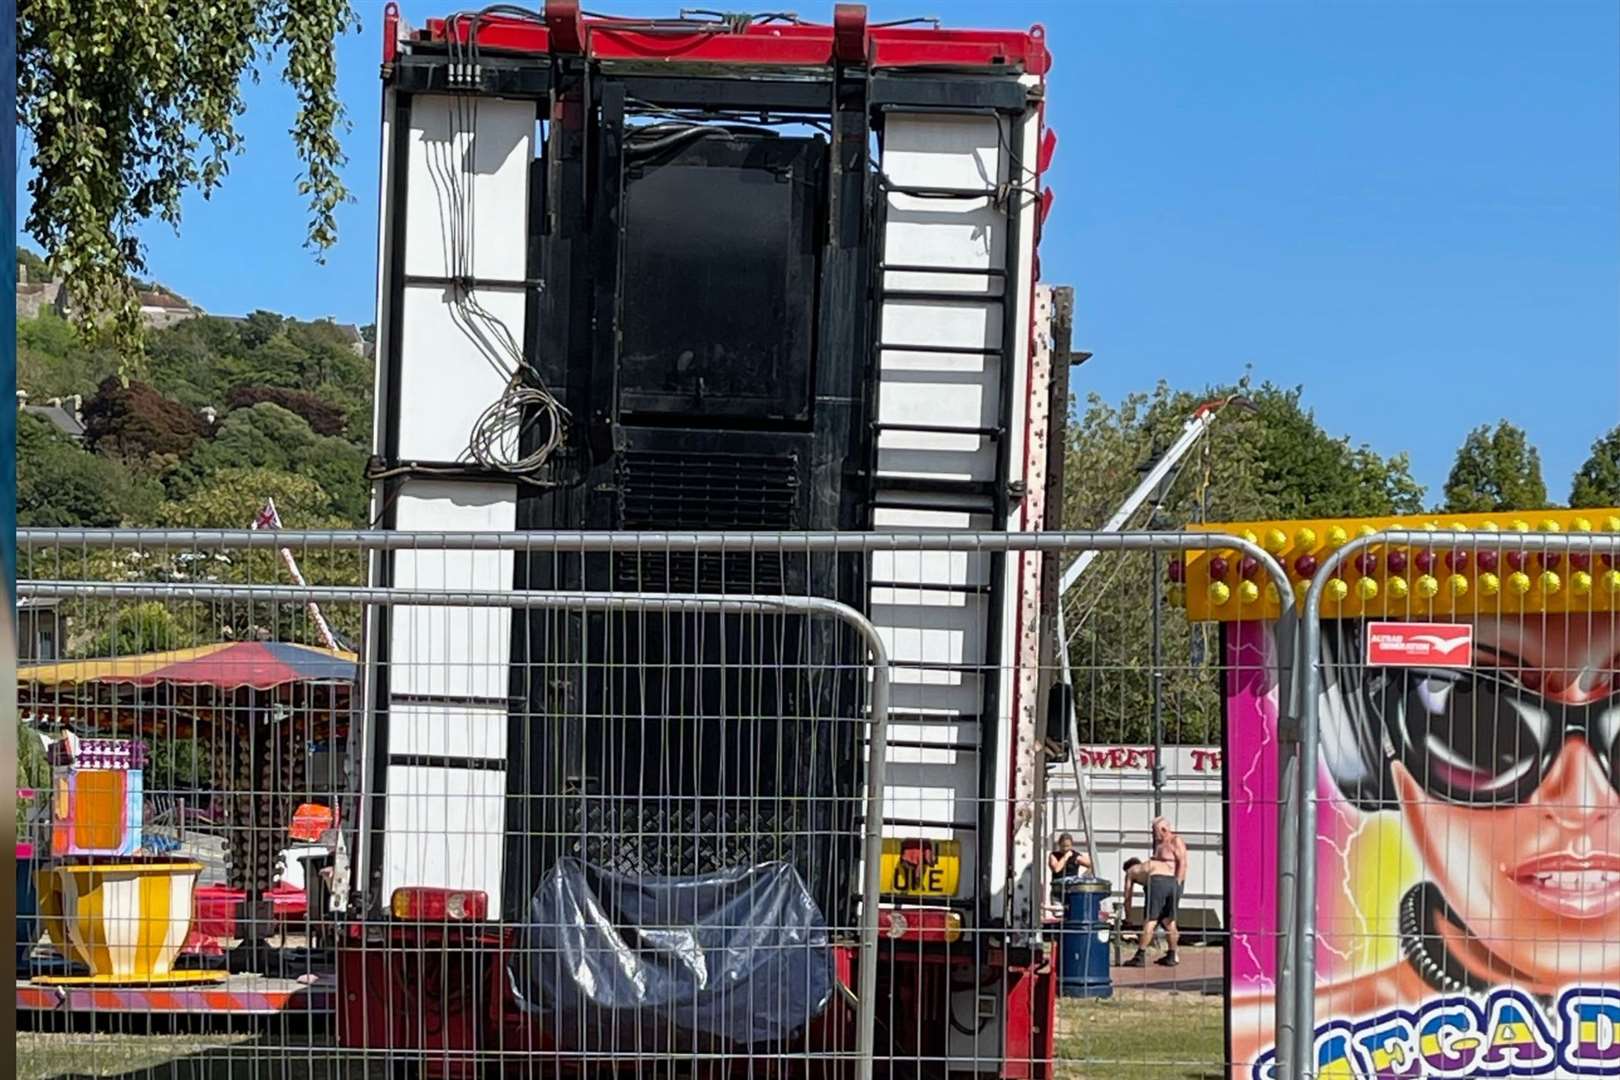 The fairground ride connected with the incident was removed. Photo: David Joseph Wright